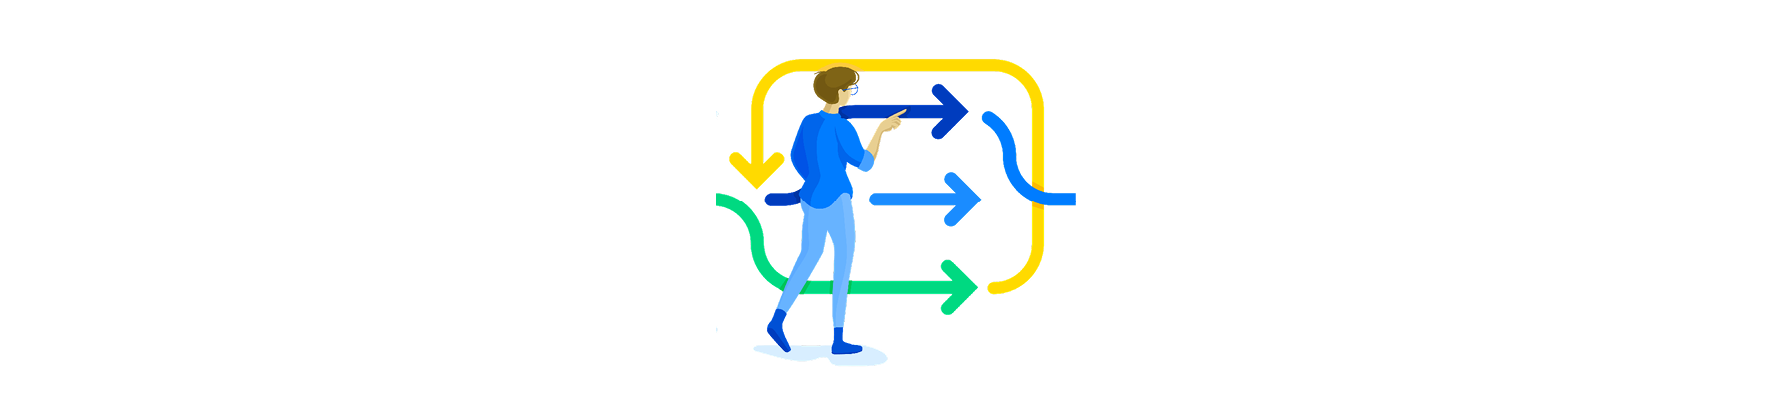 Illustarted icon of a person interacting with agile process flowchart